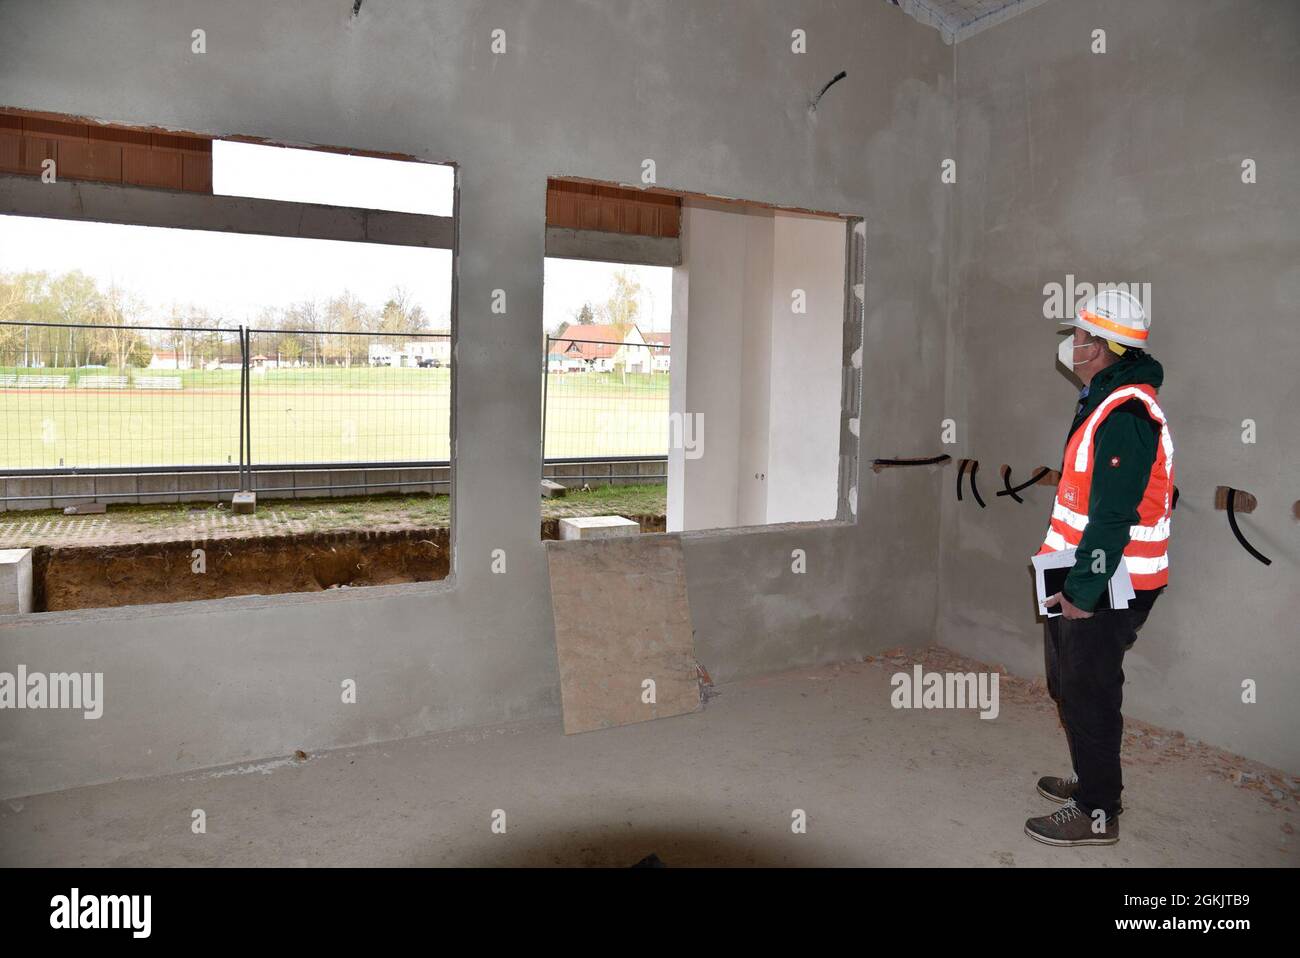 U.S. Army Corps of Engineers, Europe District Project Engineer Johann Buchfelder checks out ongoing construction of a new field house at Vilseck High School at Rose Barracks in U.S. Army Garrison Bavaria May 6, 2021. The new field house, adjacent to the school’s athletics field, will not only serve as an area to store athletics equipment but is being designed as a focal point for social activities and events. The project is part of the Army’s push for new and improved housing and other facilities to improve quality of life for Soldiers and their families stationed at Rose Barracks. Stock Photo